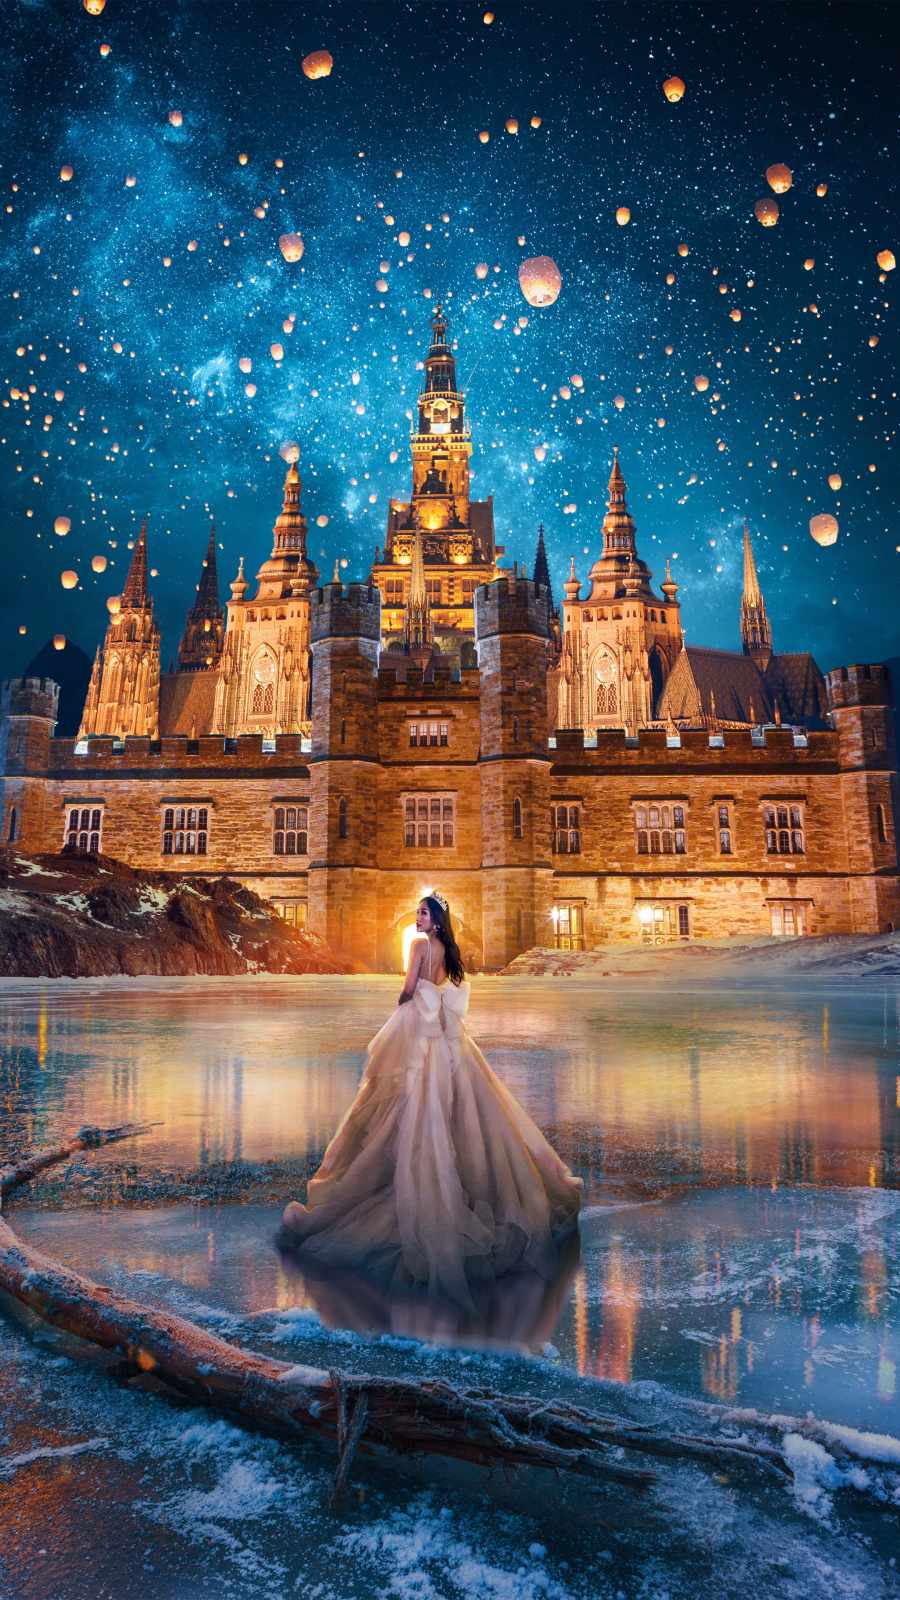 The fairytale iPhone Wallpaper